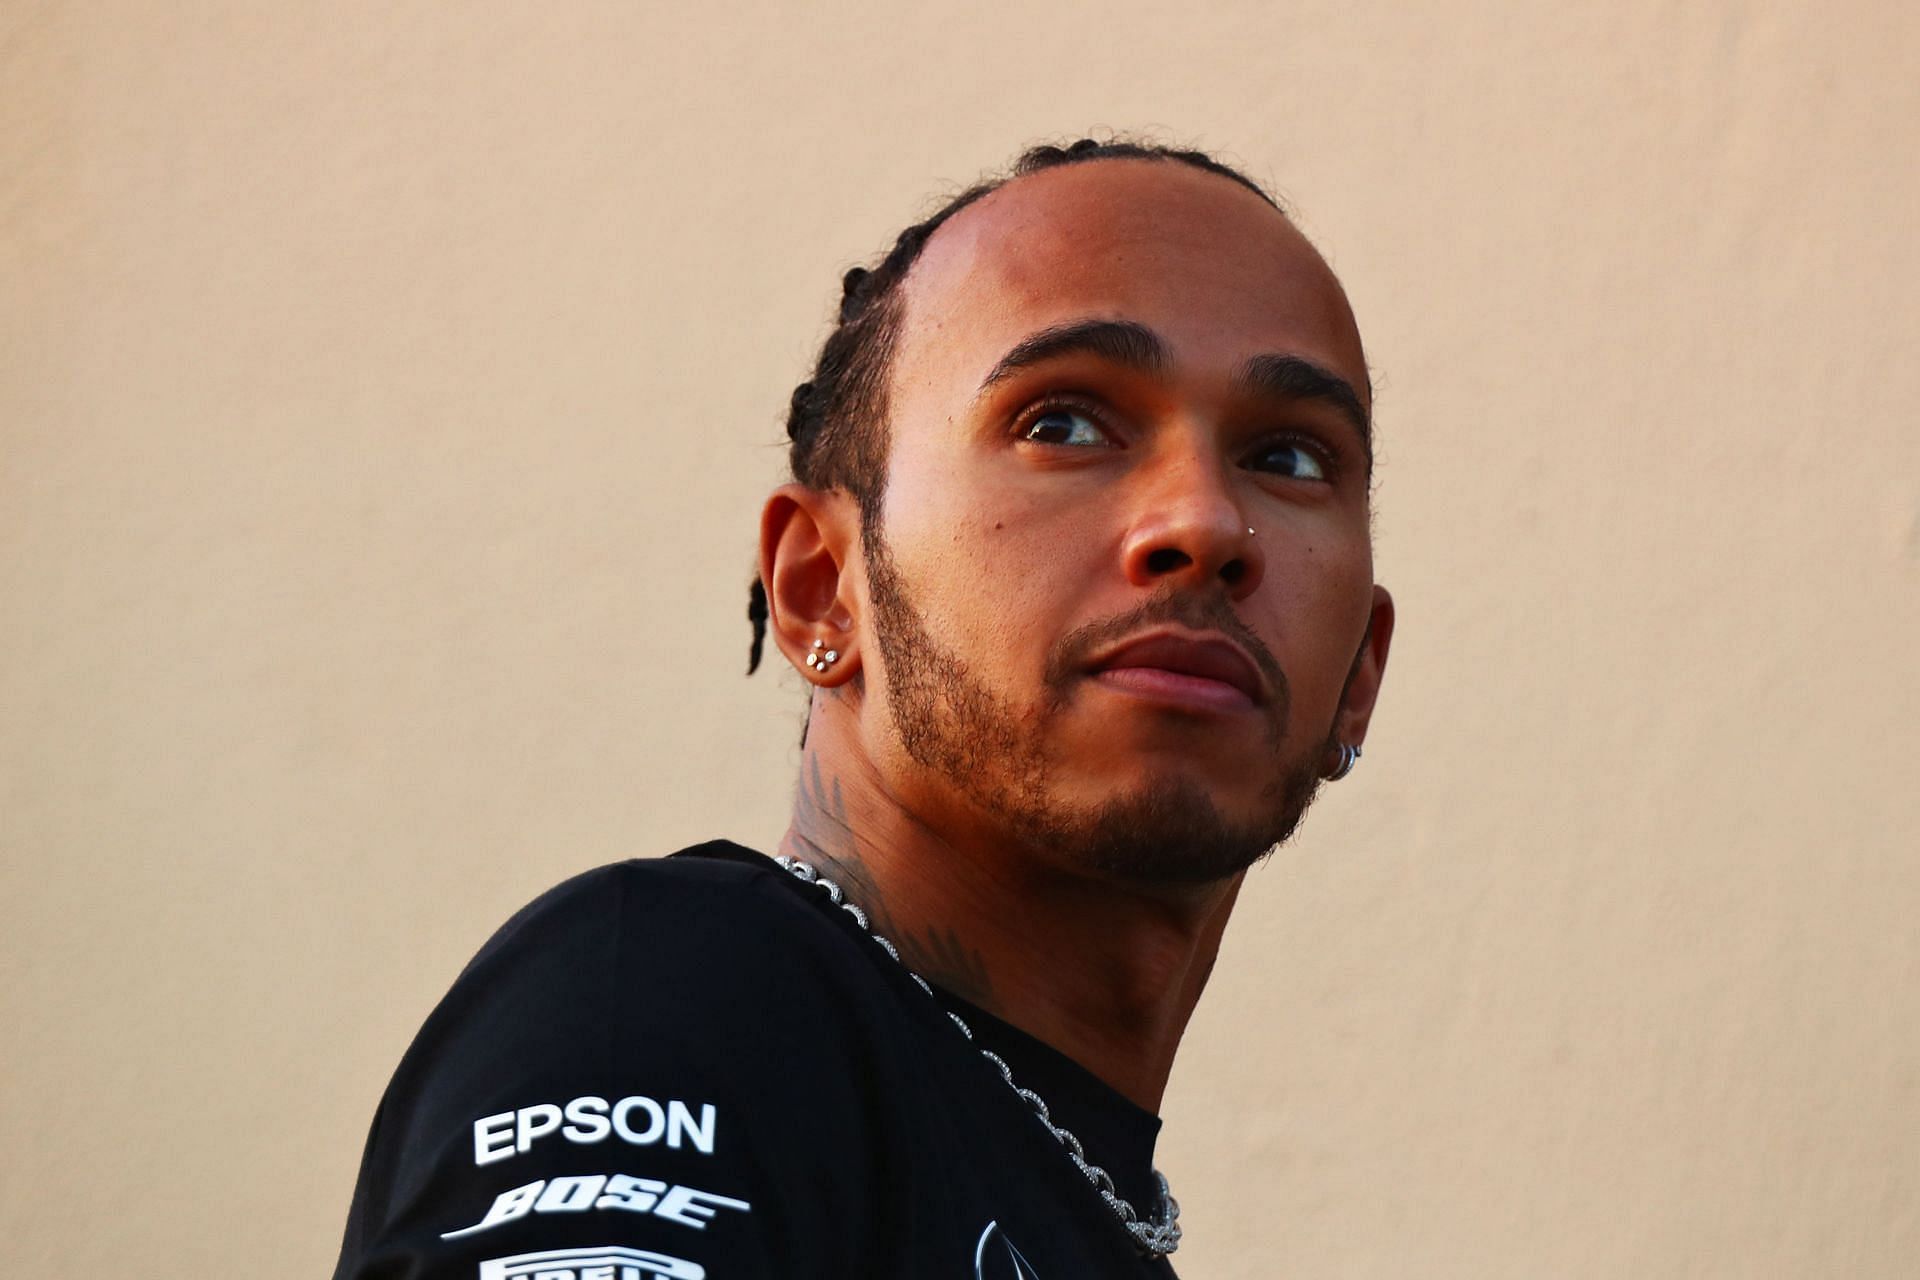 Lewis Hamilton will be aiming to add an eighth title to his tally in 2022